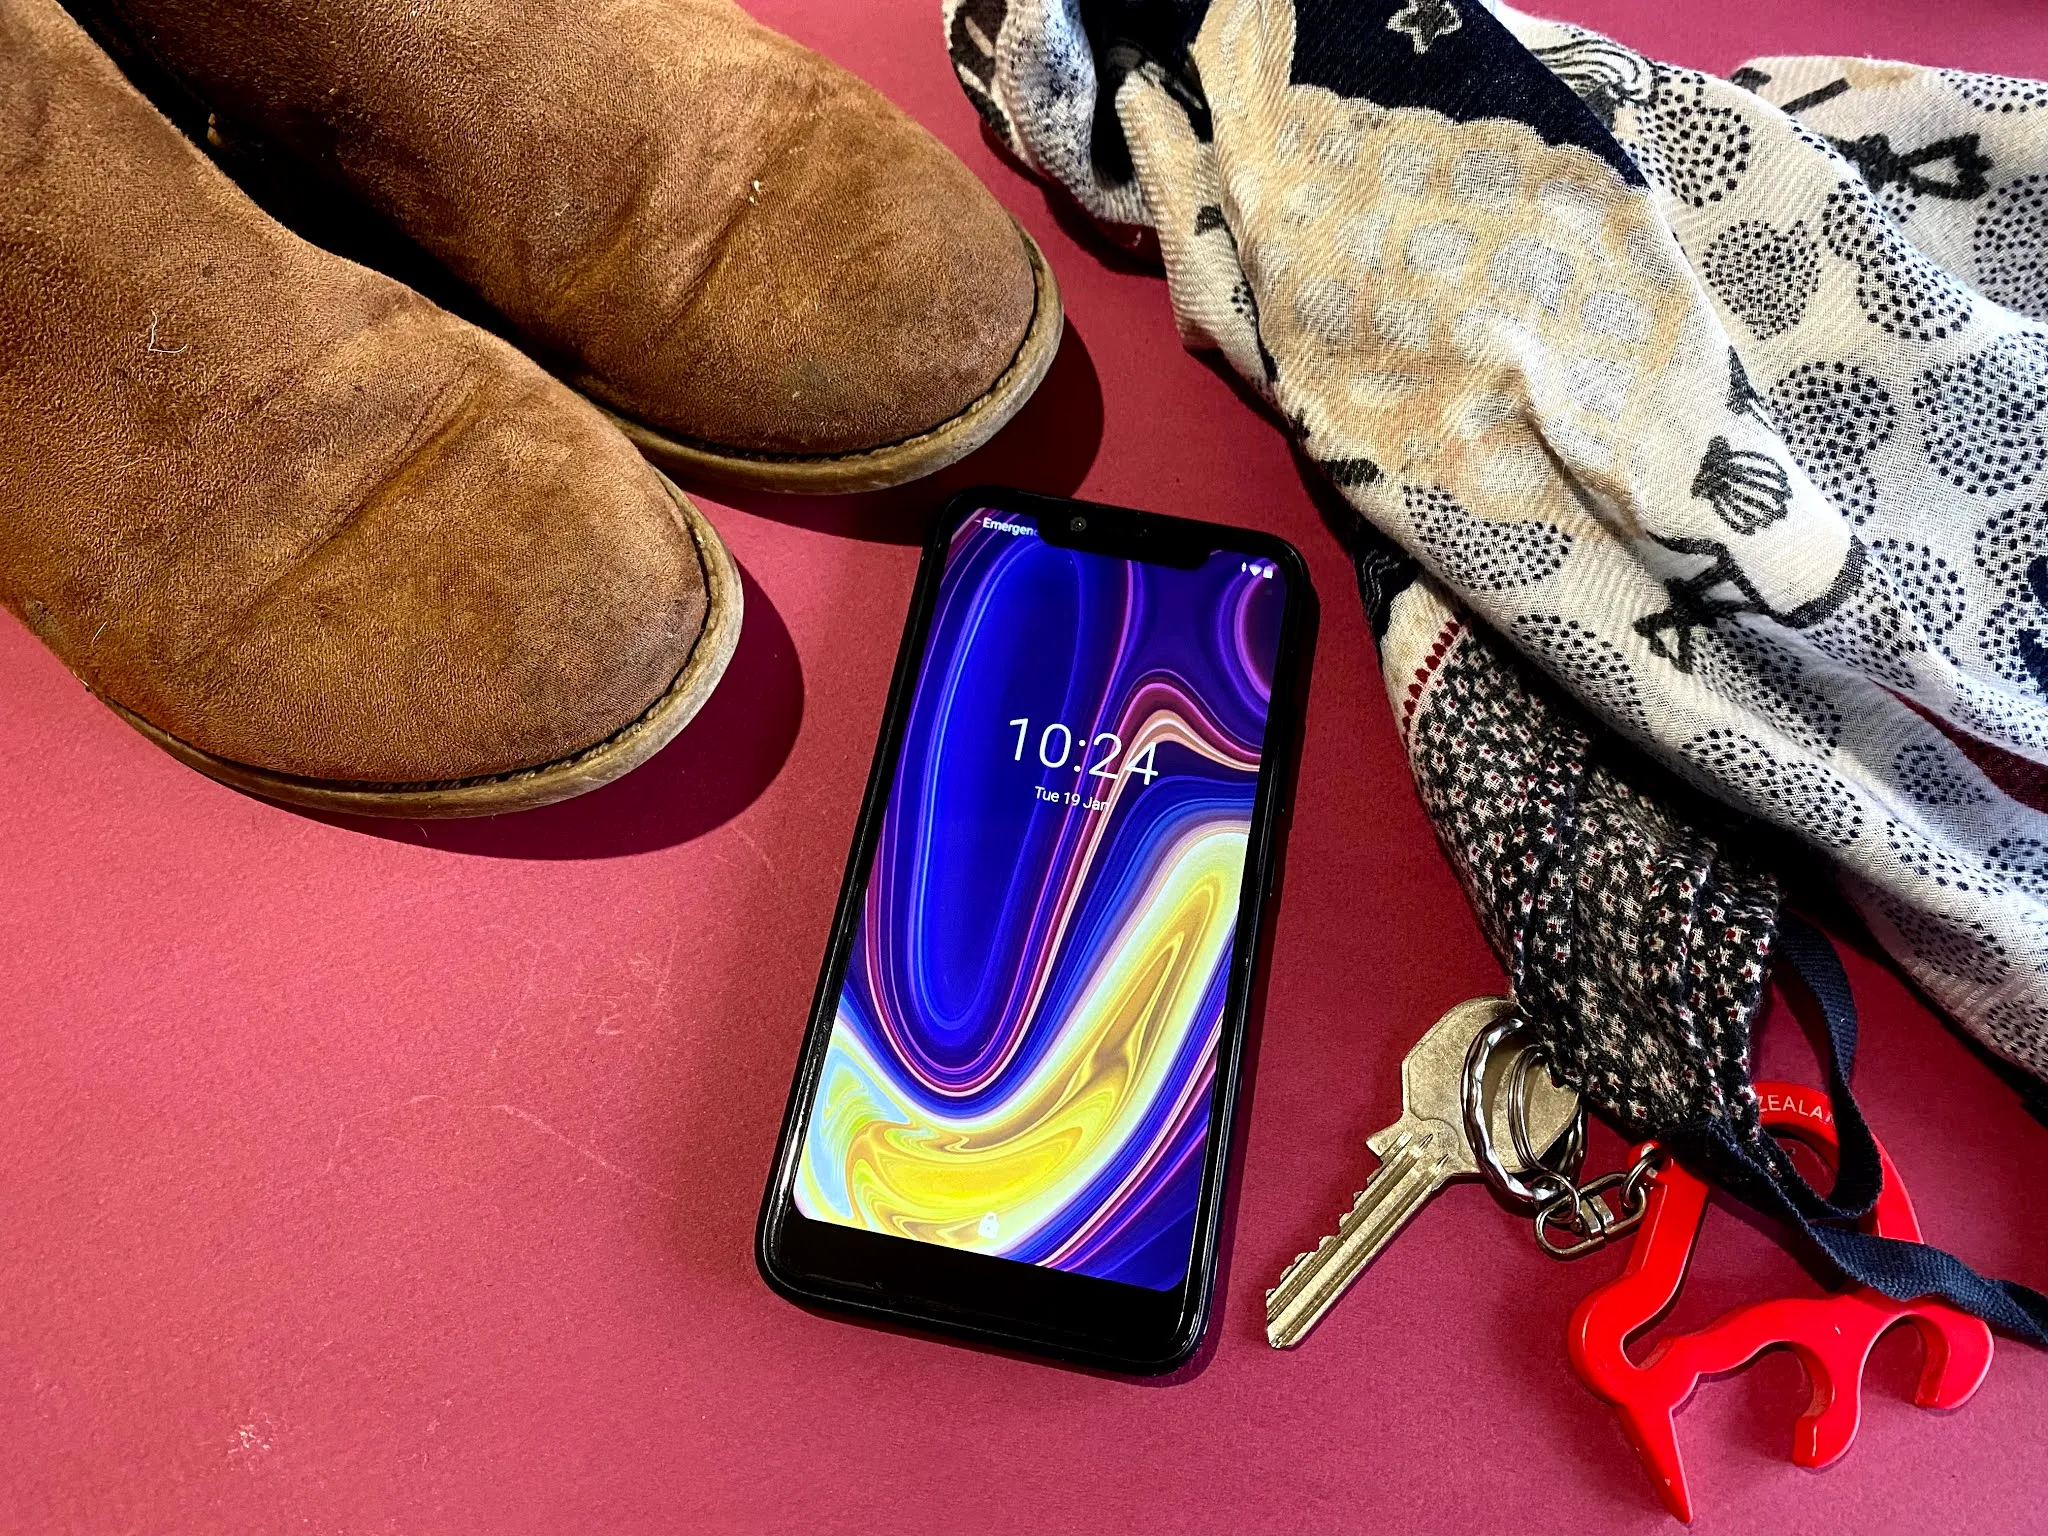 A cheap smartphone mobile next to a scarf, tween boots and keys